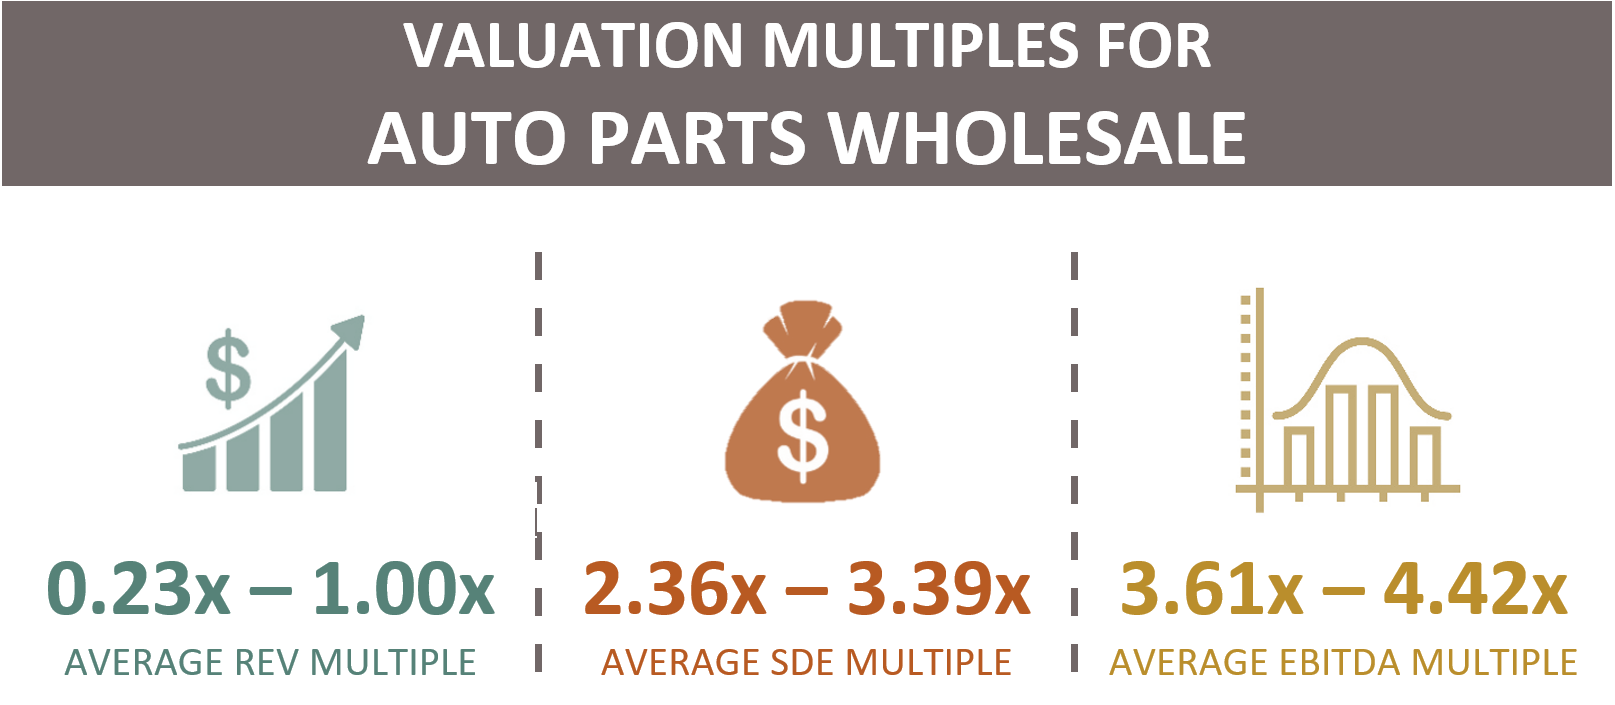 Valuation Multiples For Auto Parts Wholesaling